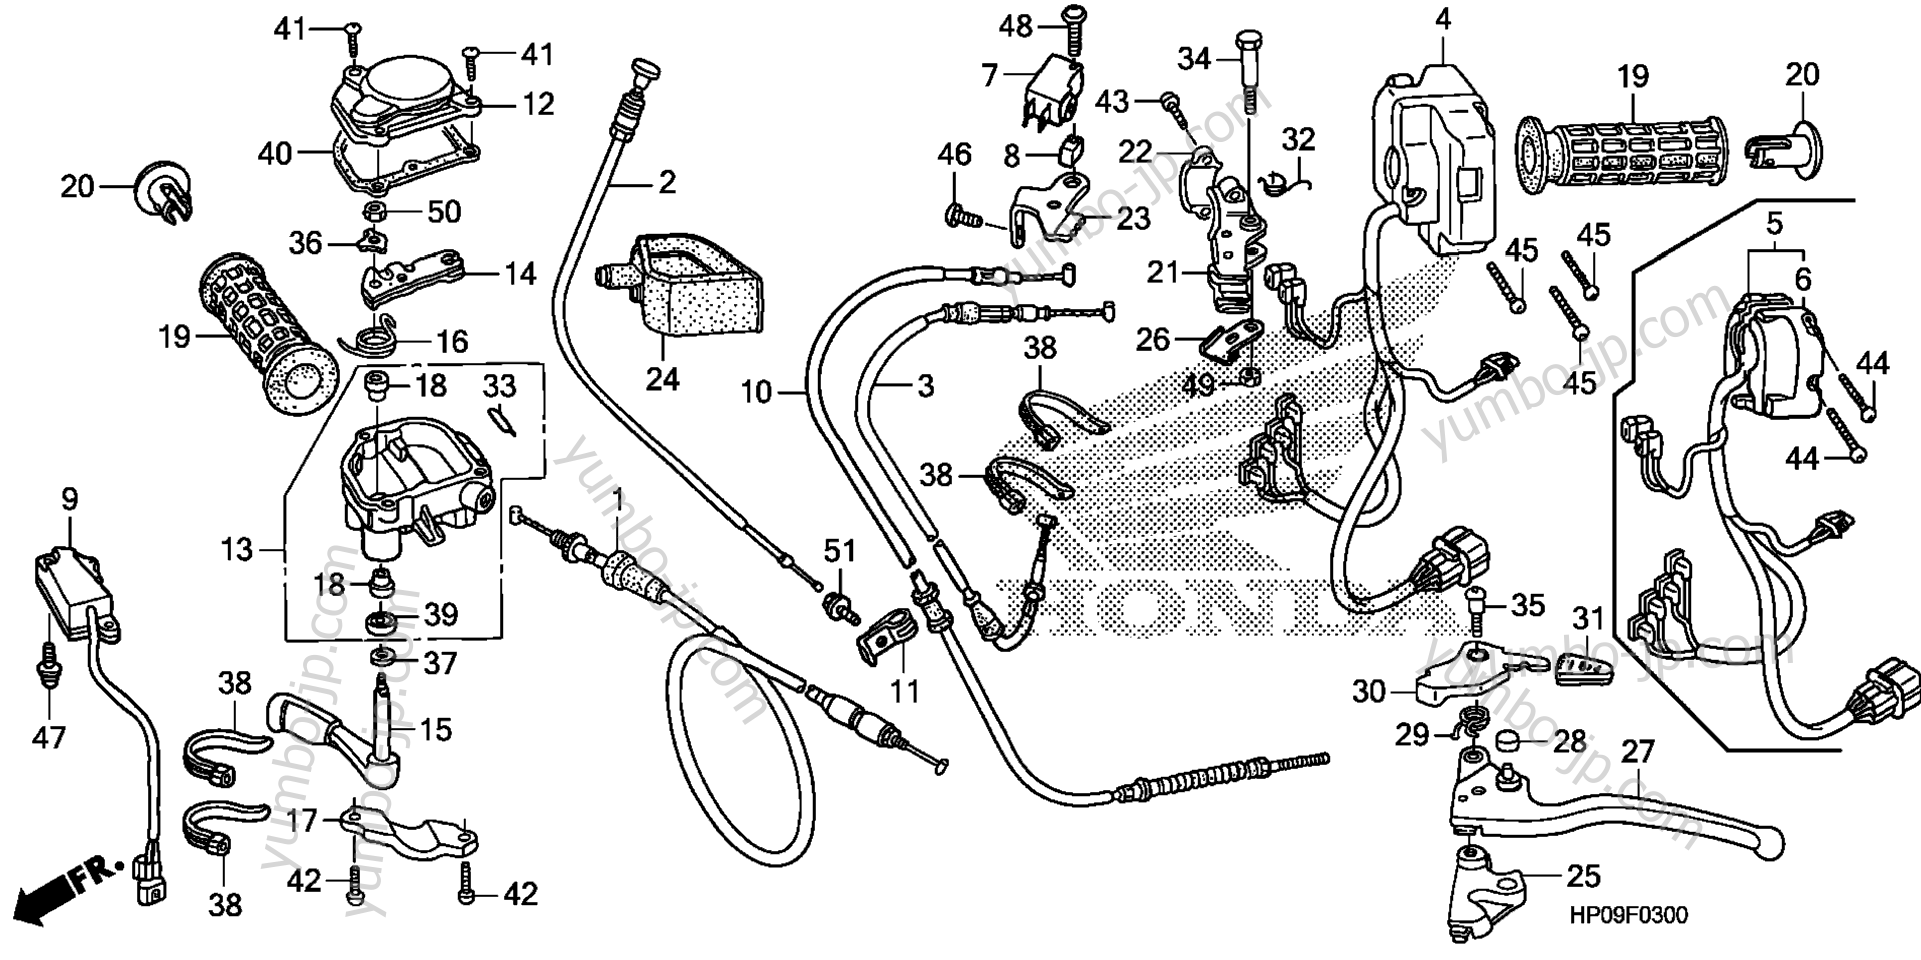 HANDLE LEVER / SWITCH / CABLE for ATVs HONDA TRX500FM A 2009 year